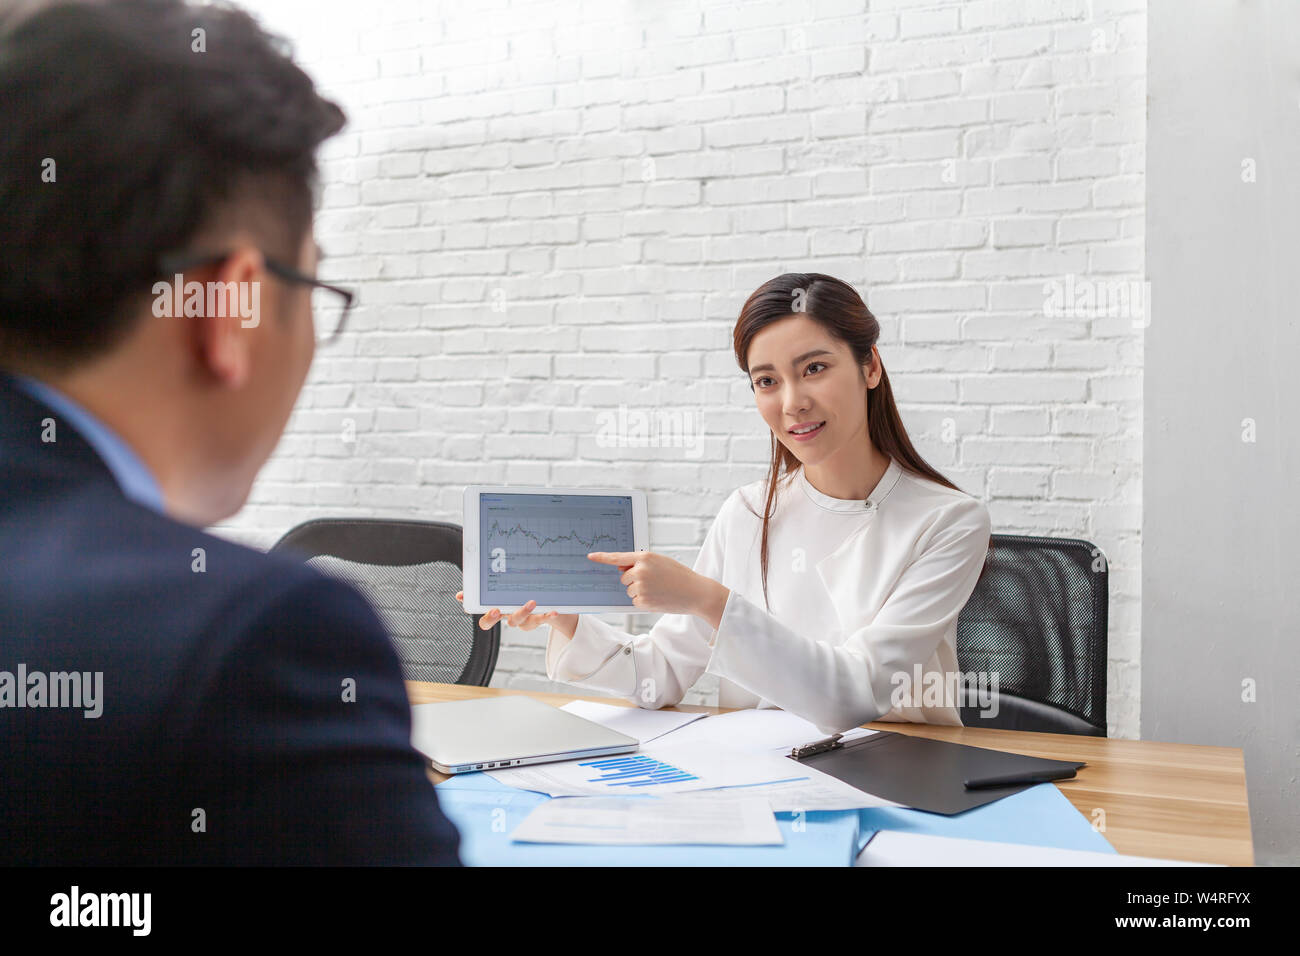 Woman behind desk holding tablet, Beijing, China Stock Photo